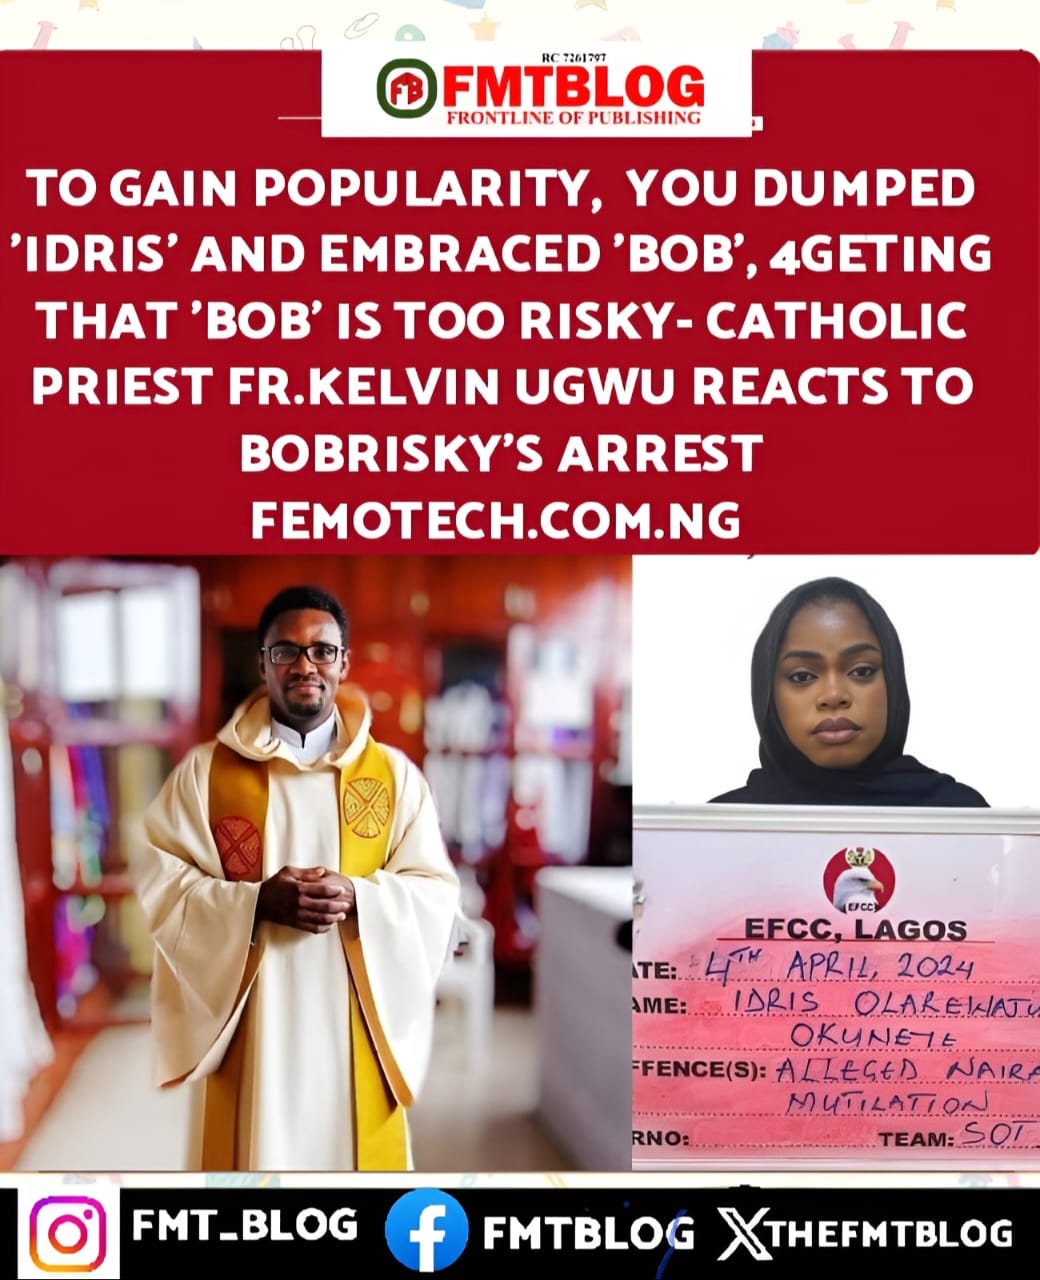 To Gain Popularity, You Dumped ‘Idris’ And Embraced ‘Bob’, 4geting That ‘Bob’ Is Too Risky-Catholic Priest Fr. Kelvin Ugwu Reacts To Bobrisky’s Arrest